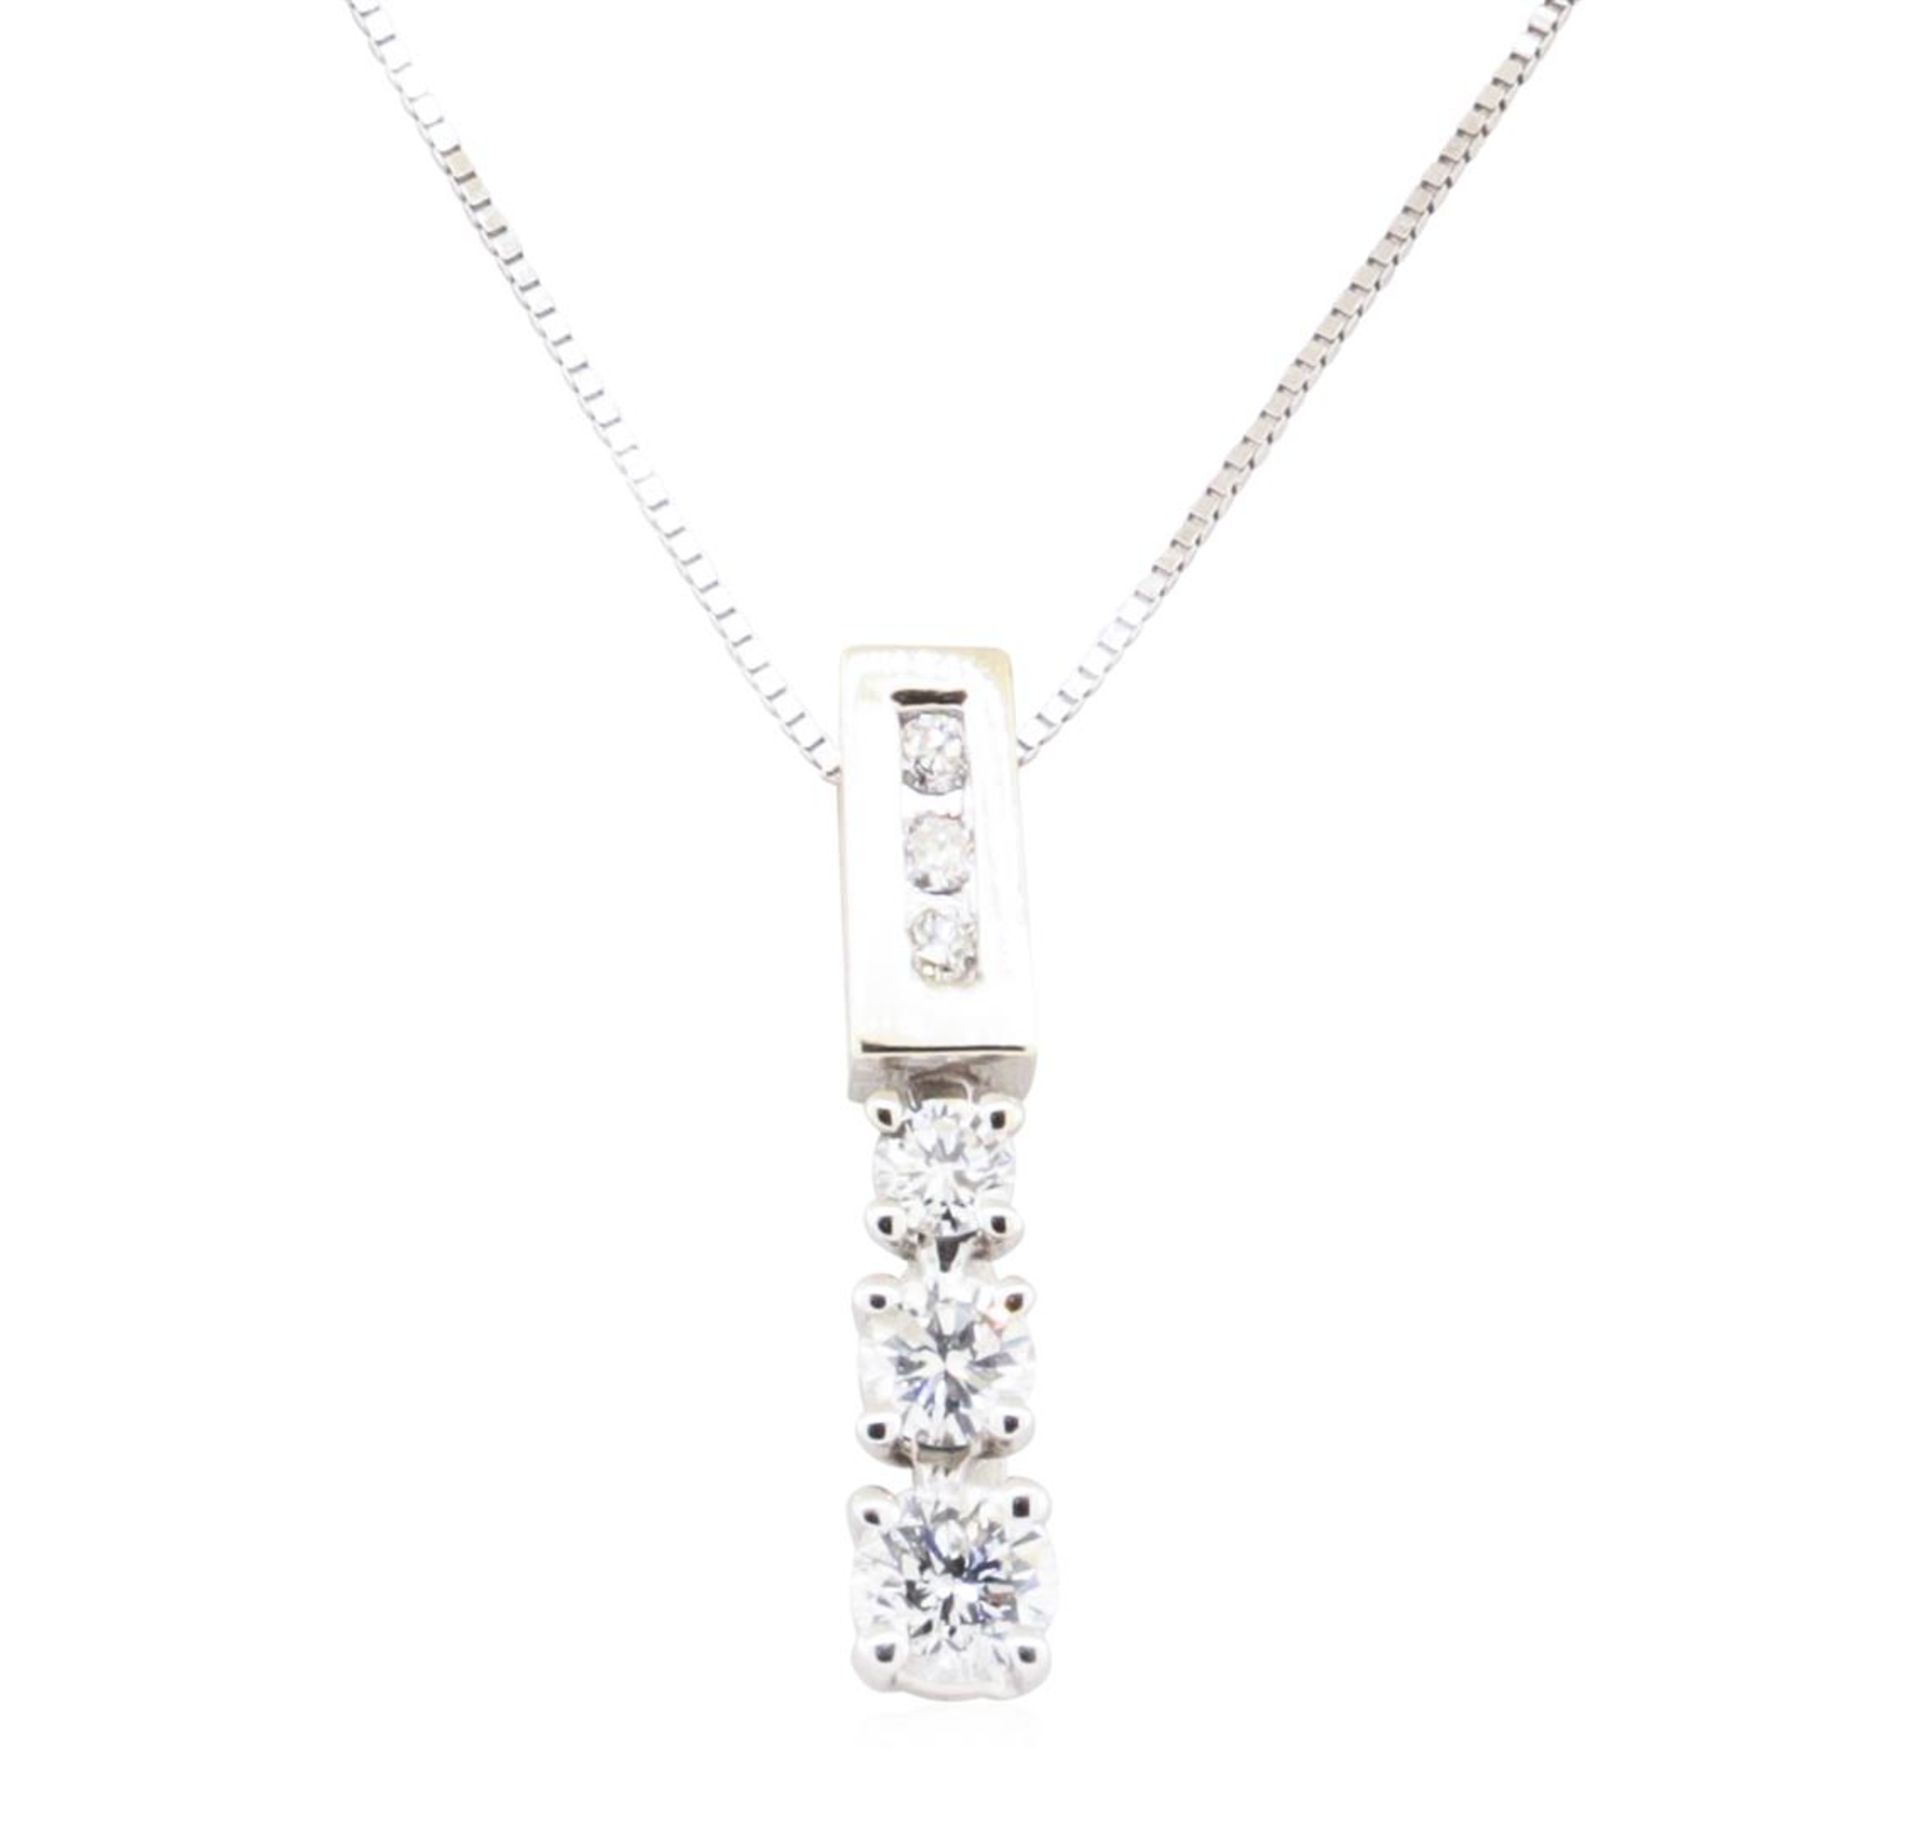 0.60ctw Diamond Straight Line Pendant with Chain - 14KT White Gold - Image 2 of 2